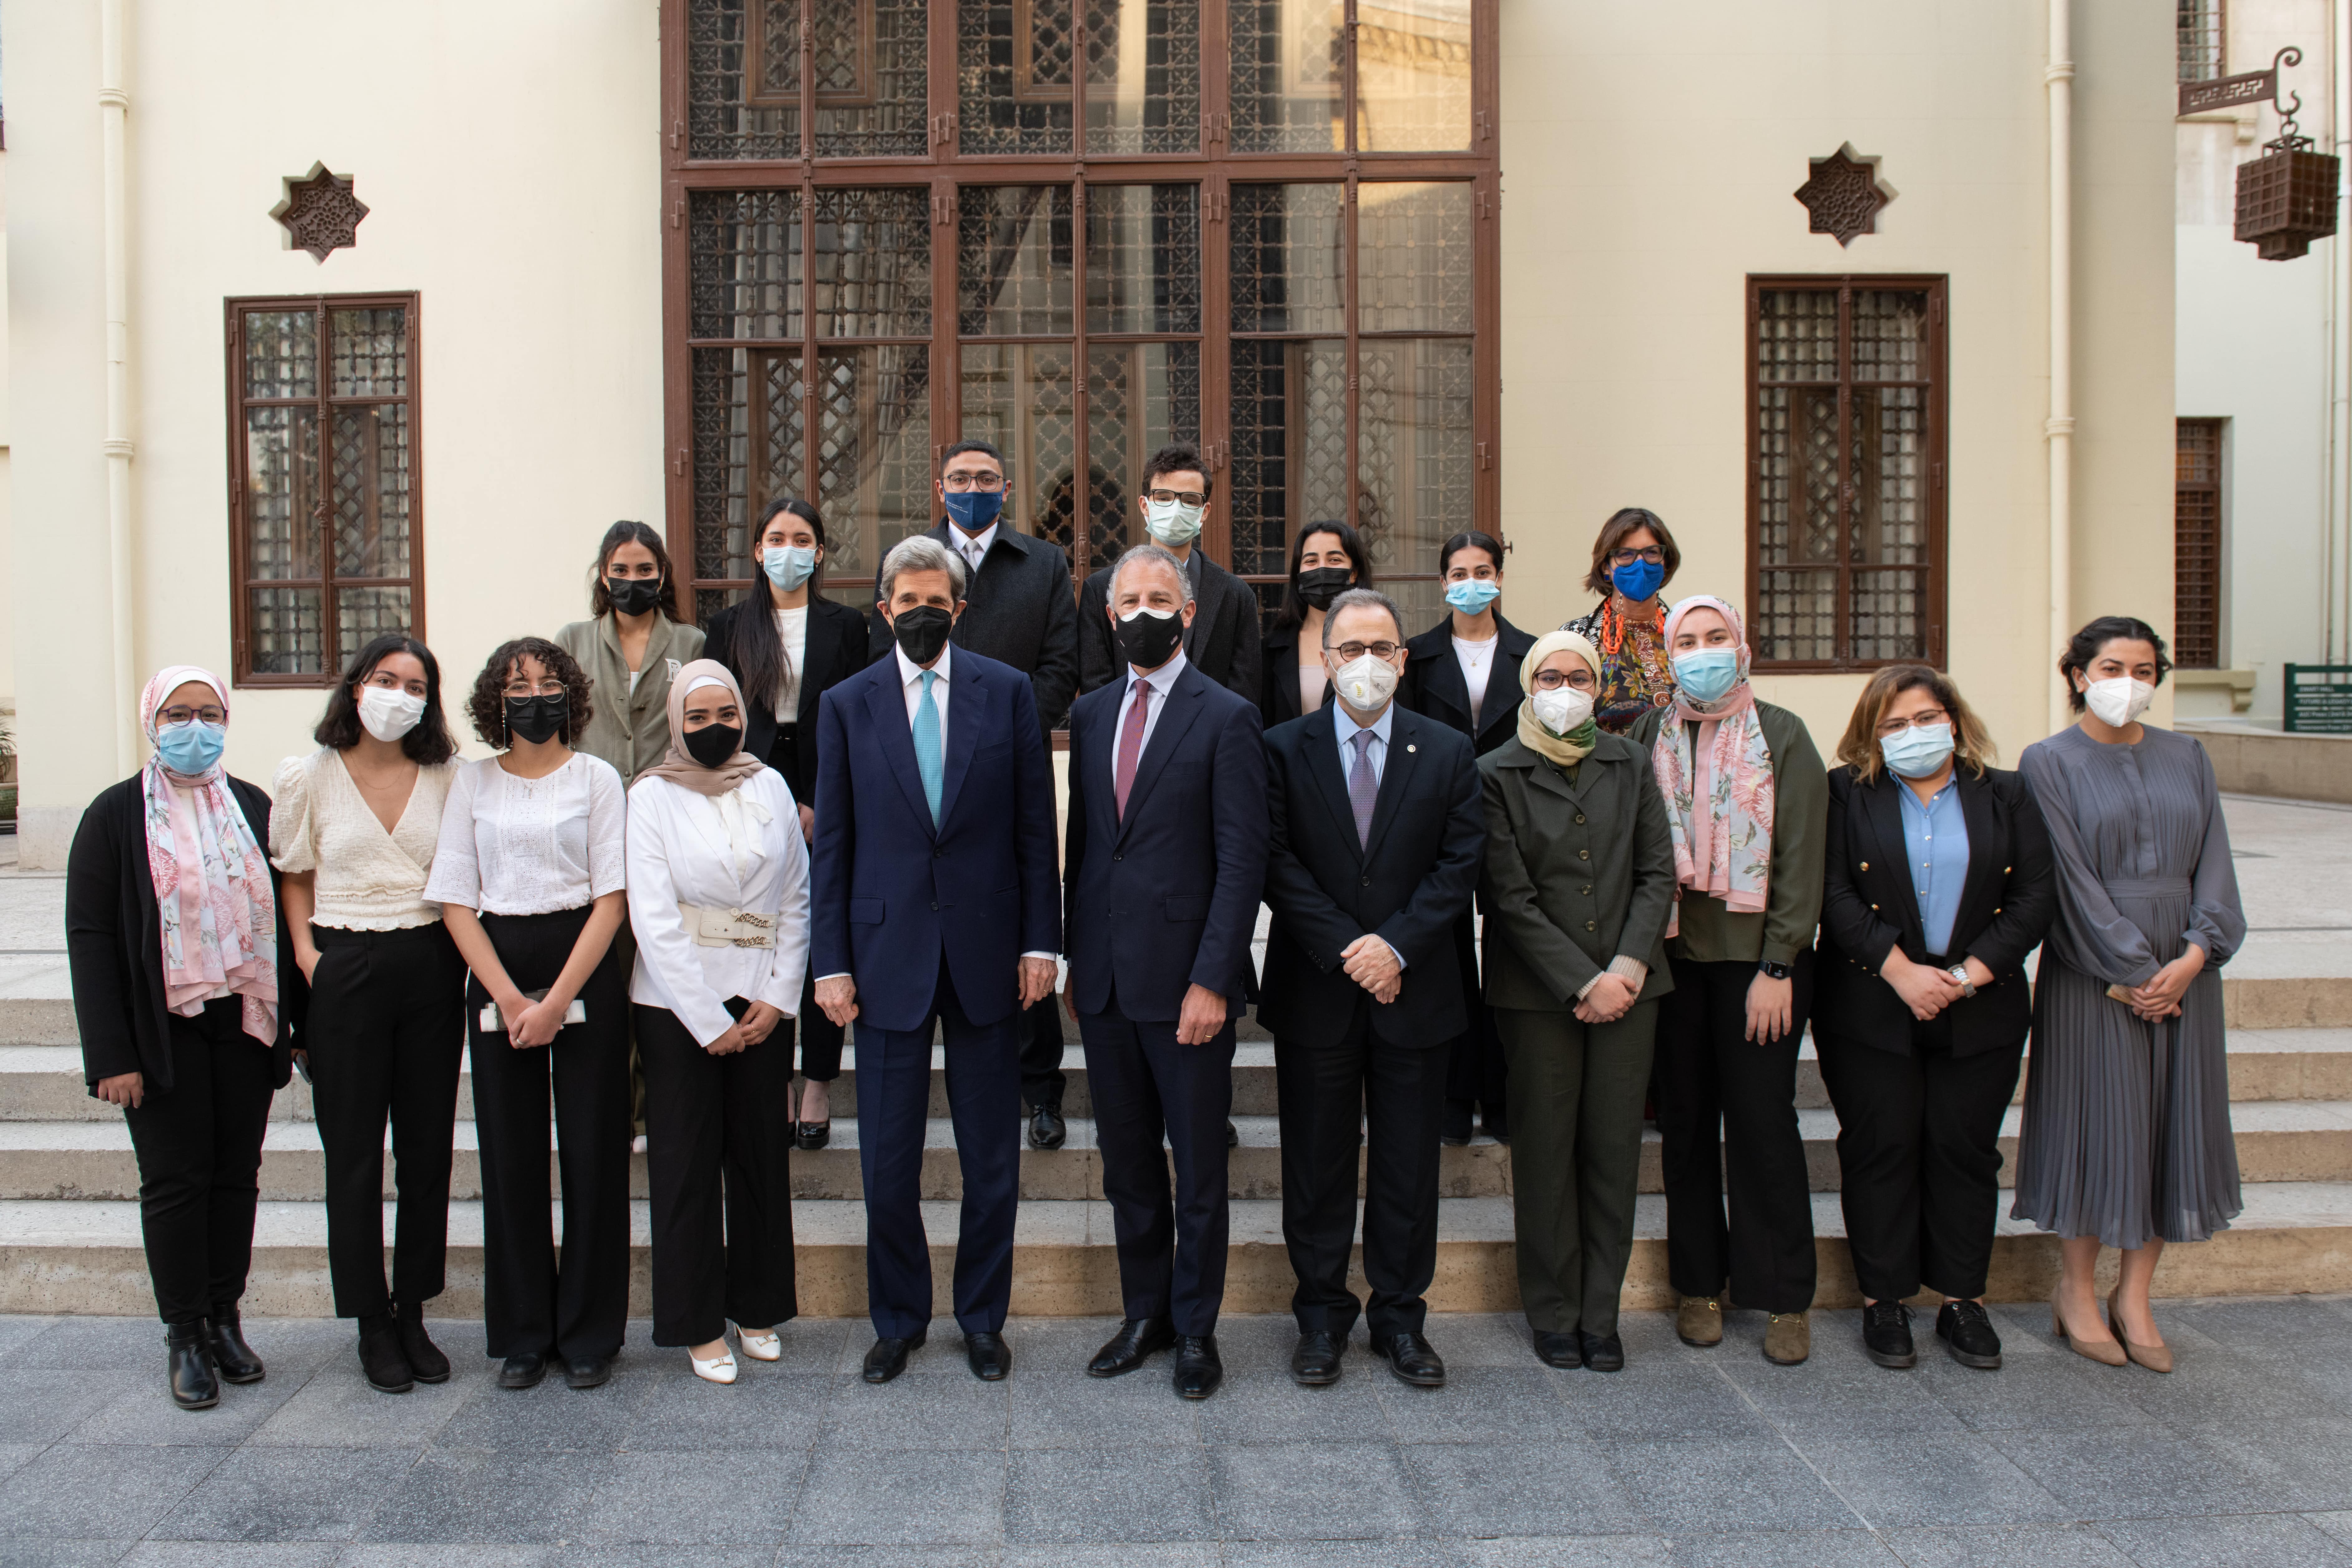 Group photo of people wearing masks